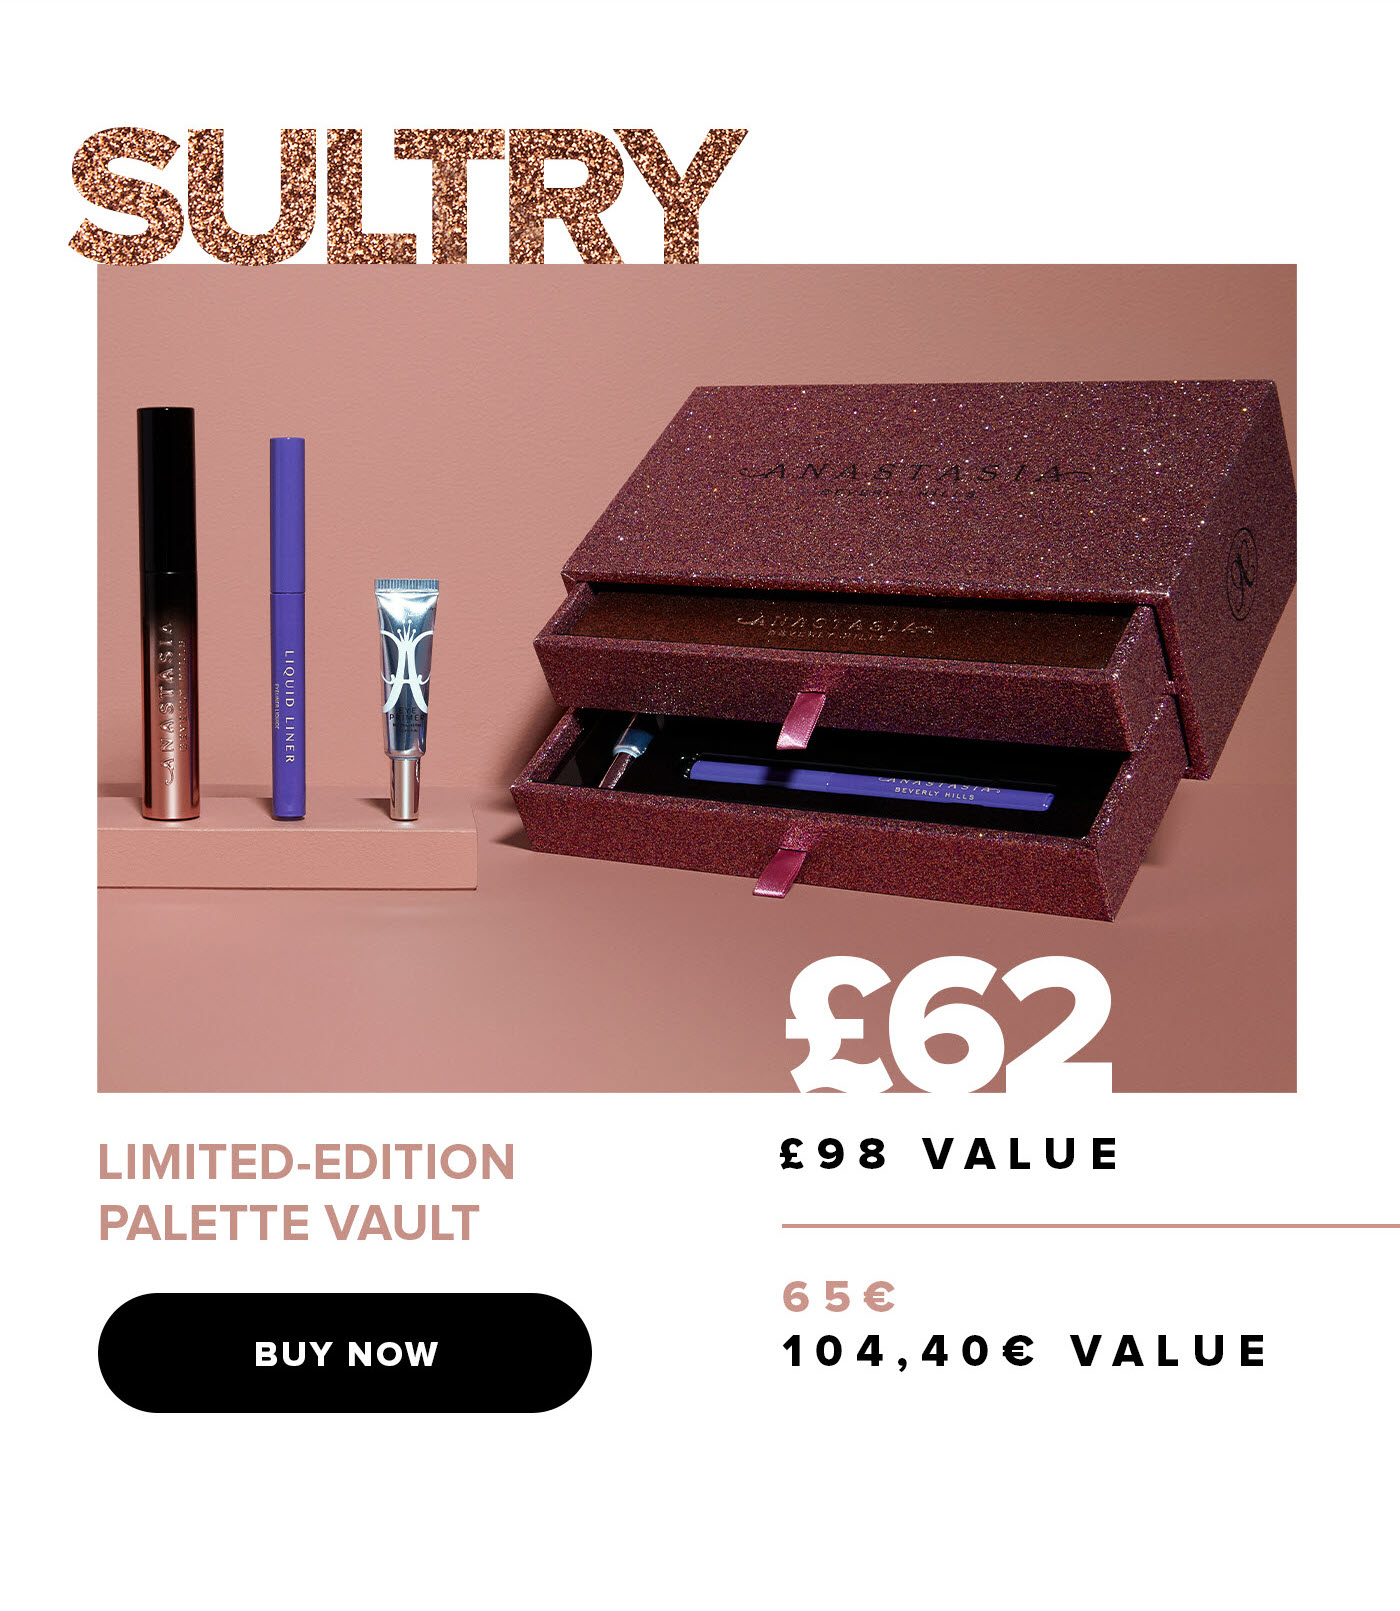 Sultry Limited-Edition Palette Vault